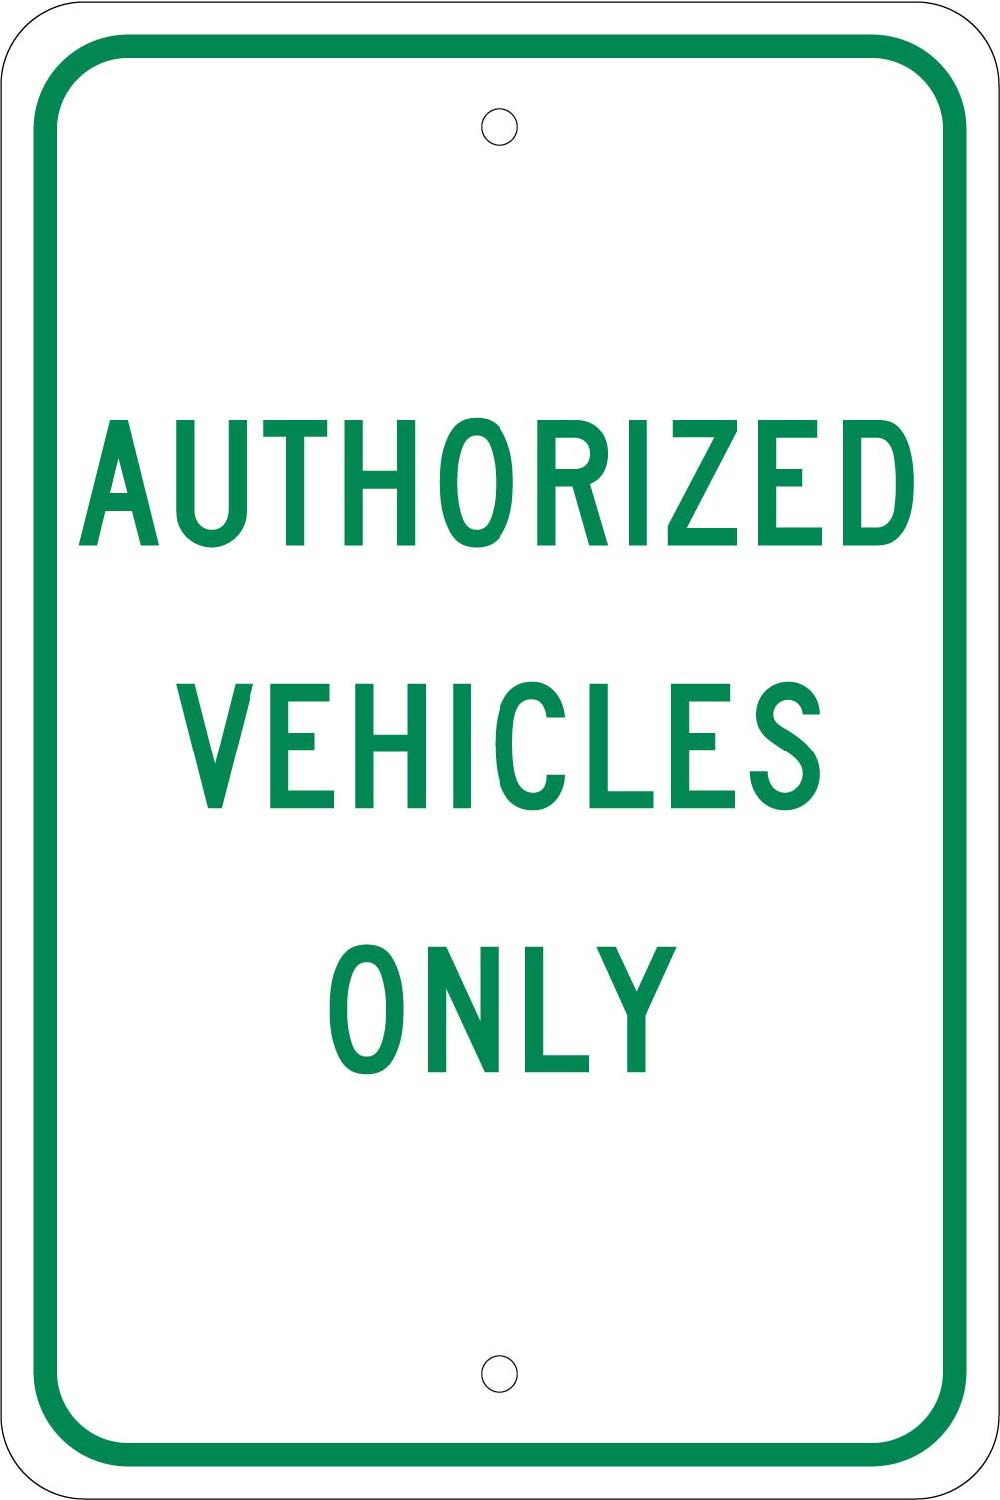 Authorized Vehicles Only Sign-eSafety Supplies, Inc